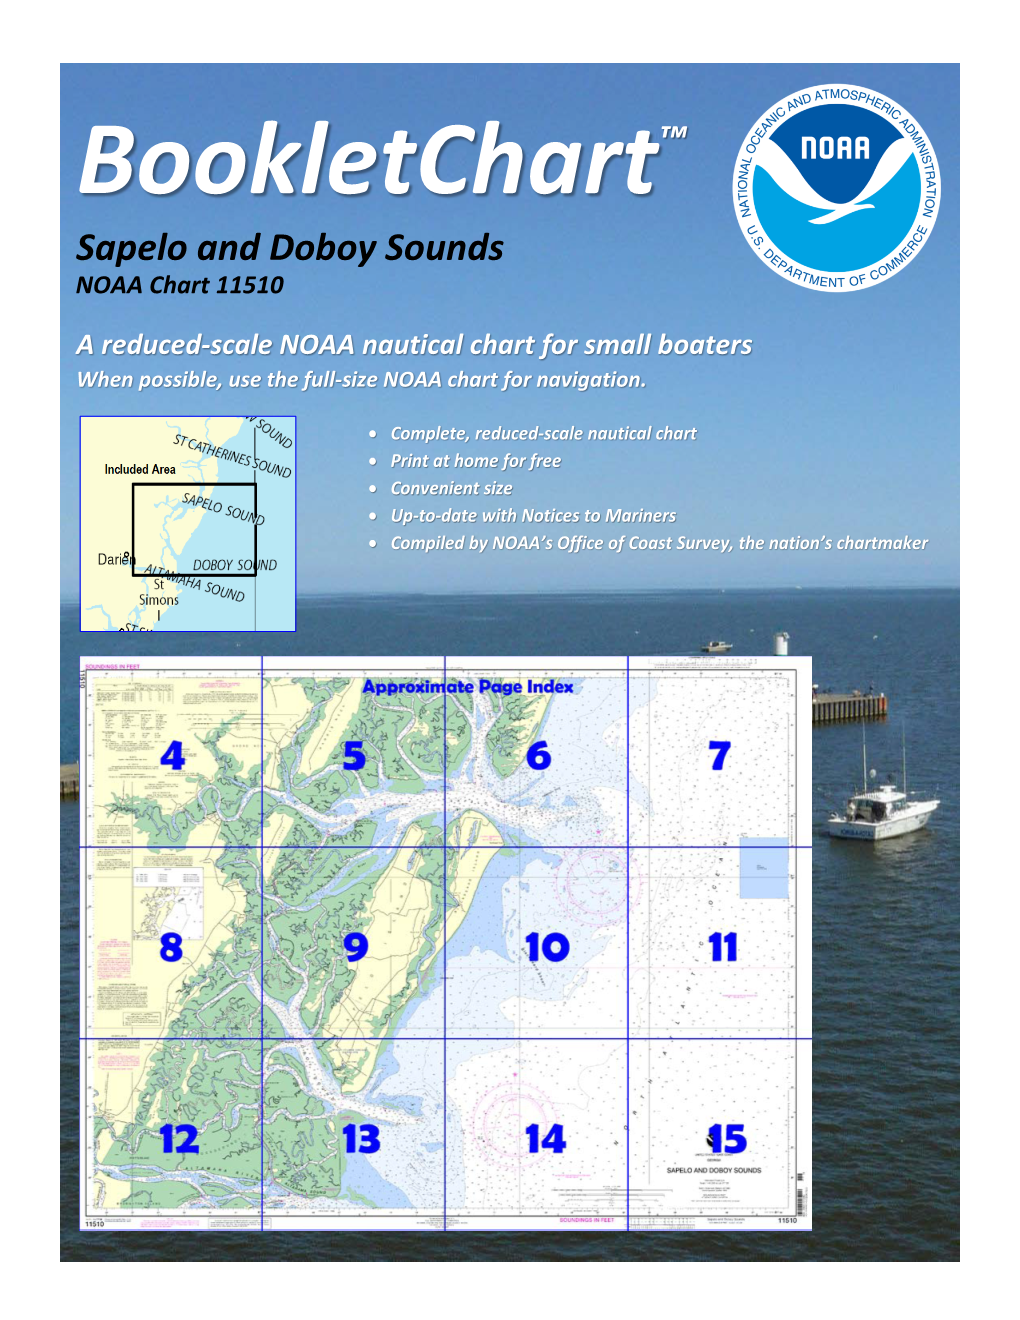 Bookletchart™ Sapelo and Doboy Sounds NOAA Chart 11510